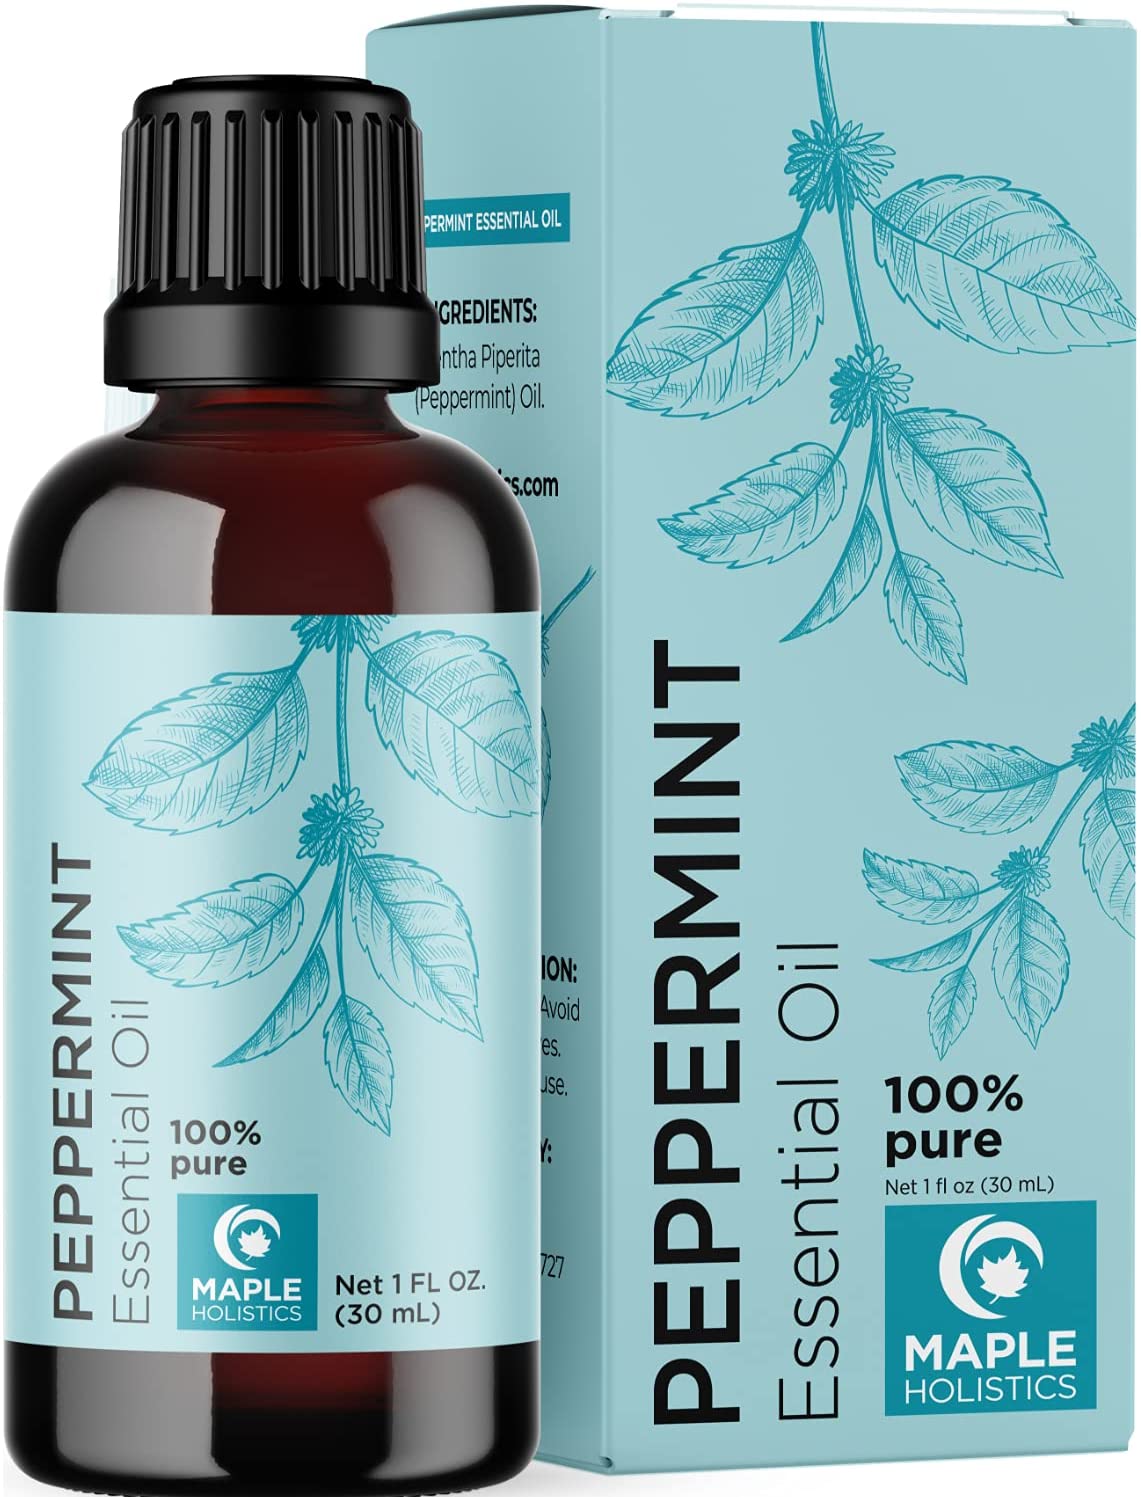 Review of 100% Pure Peppermint Oil Undiluted by Maple Holistics